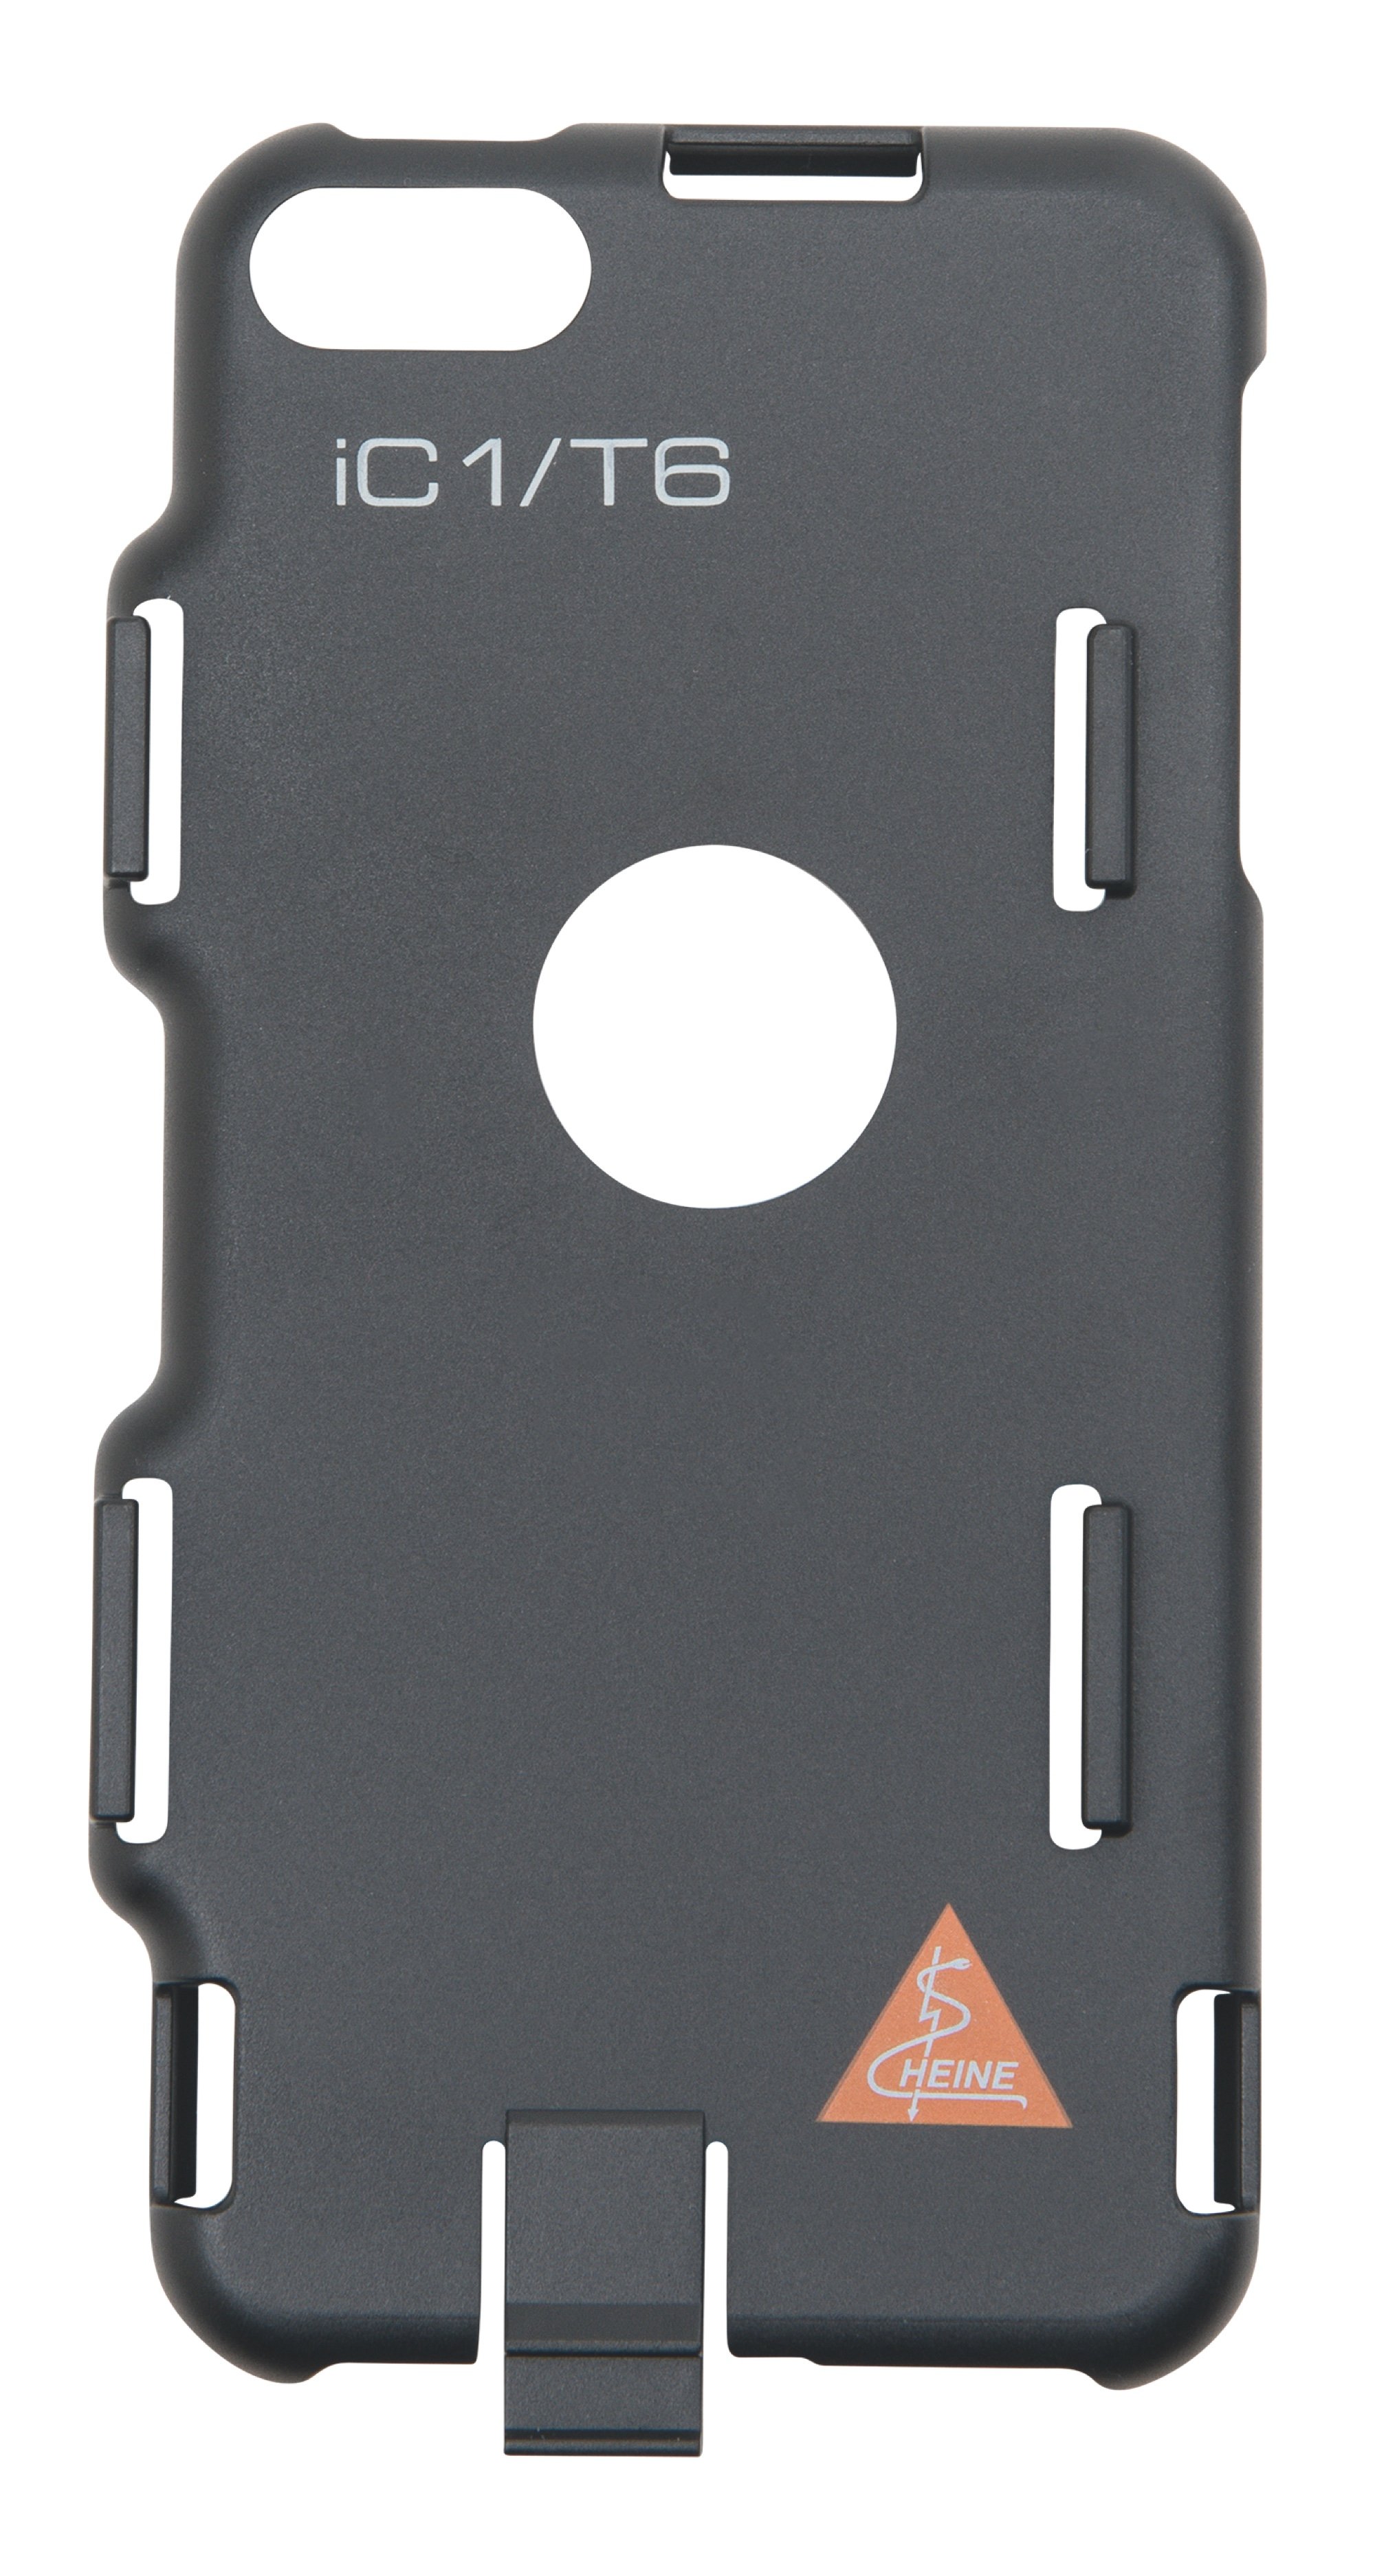 HEINE iC 1 Mounting Case for iPod touch 6th Generation